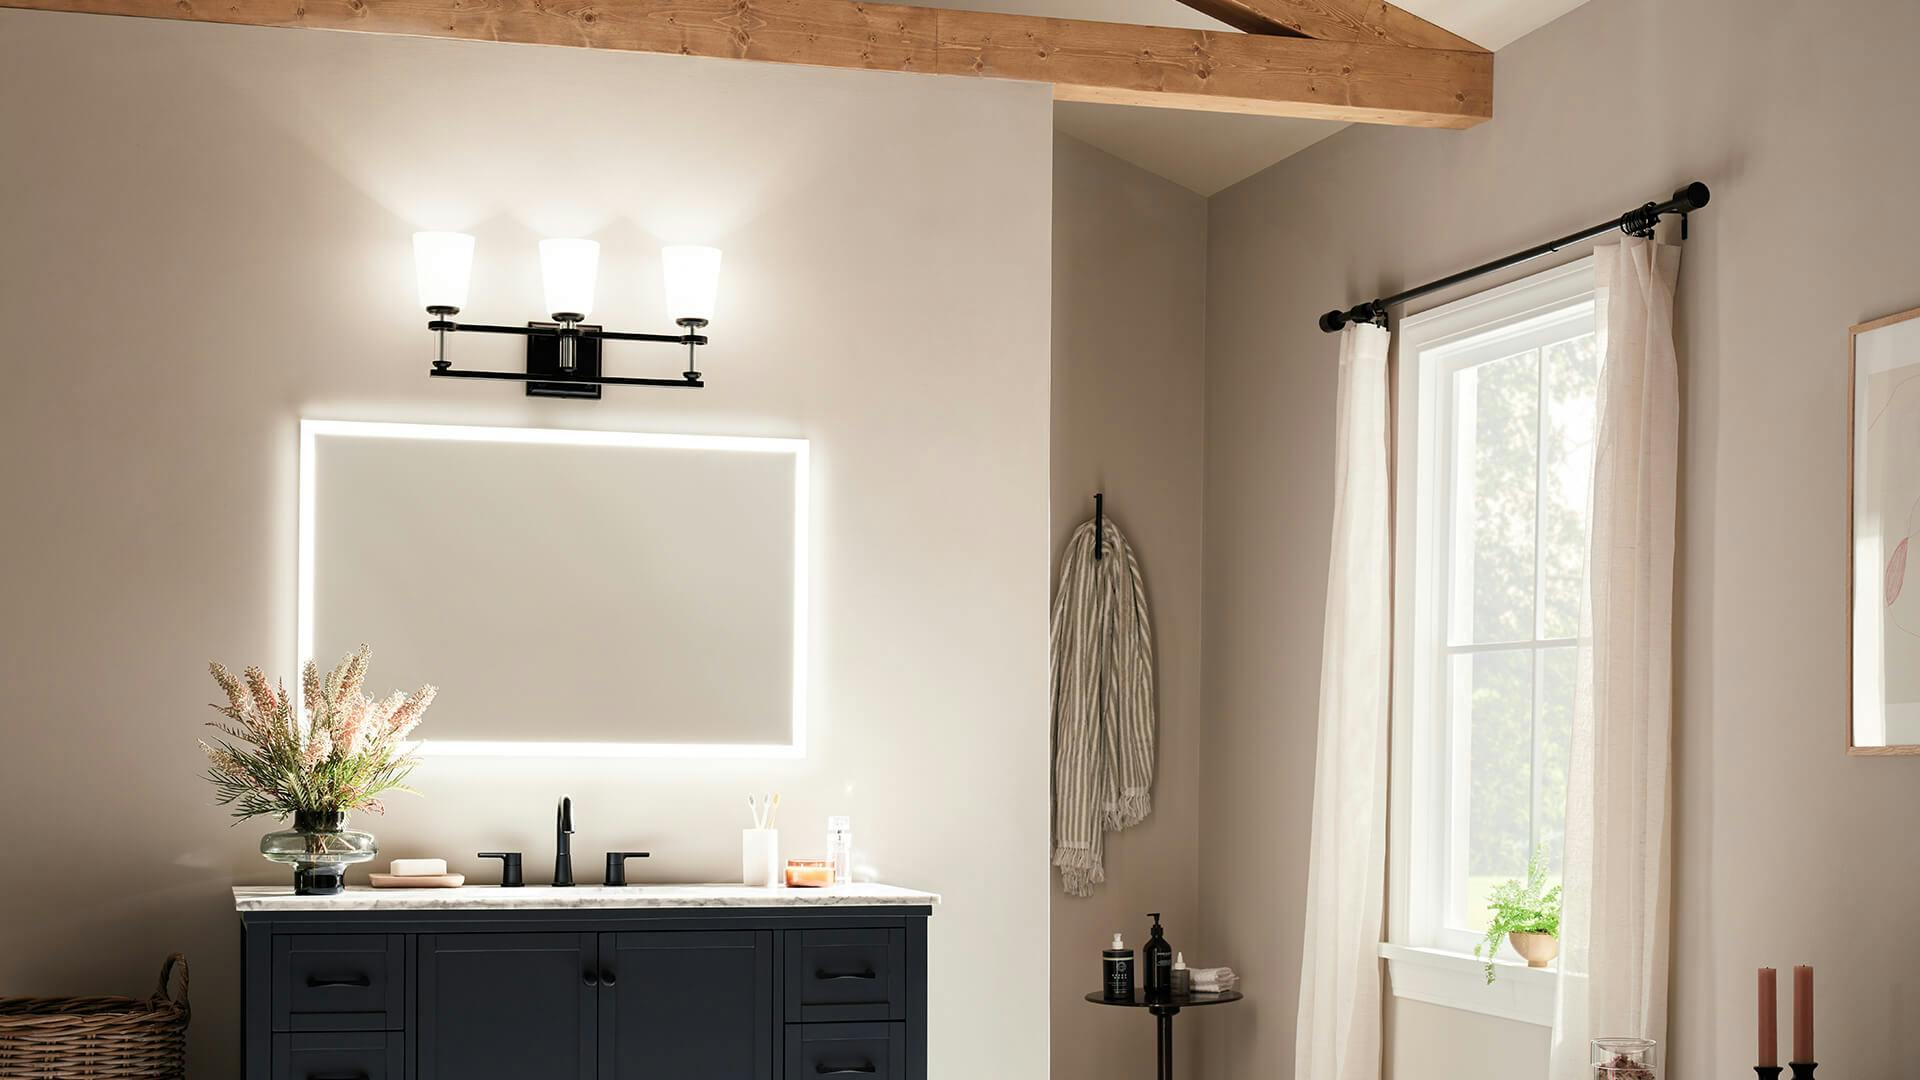 White bathroom with natural wood beams and dark vanity with Rosalind 3-light vanity light in black over mirror